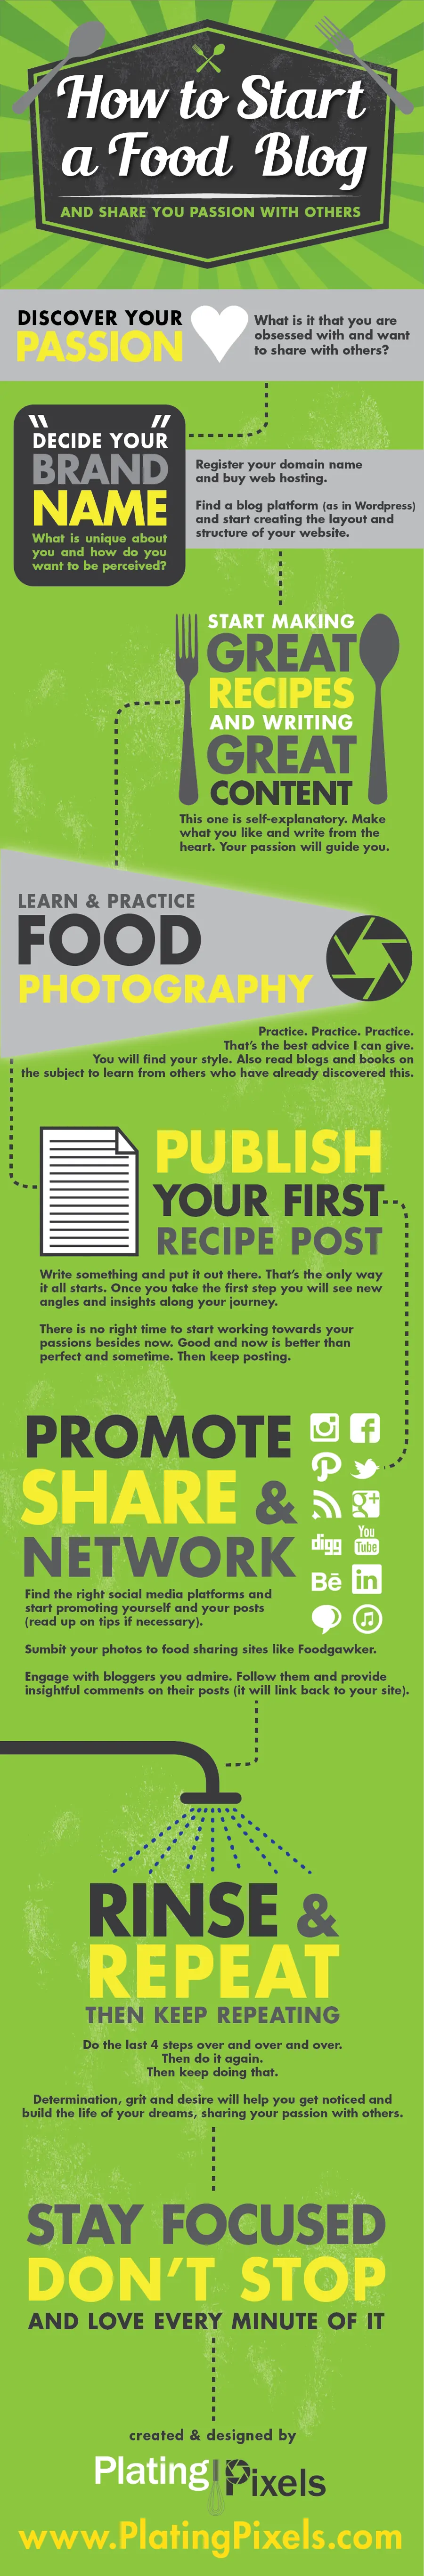 How to Start a Food Blog Infographic